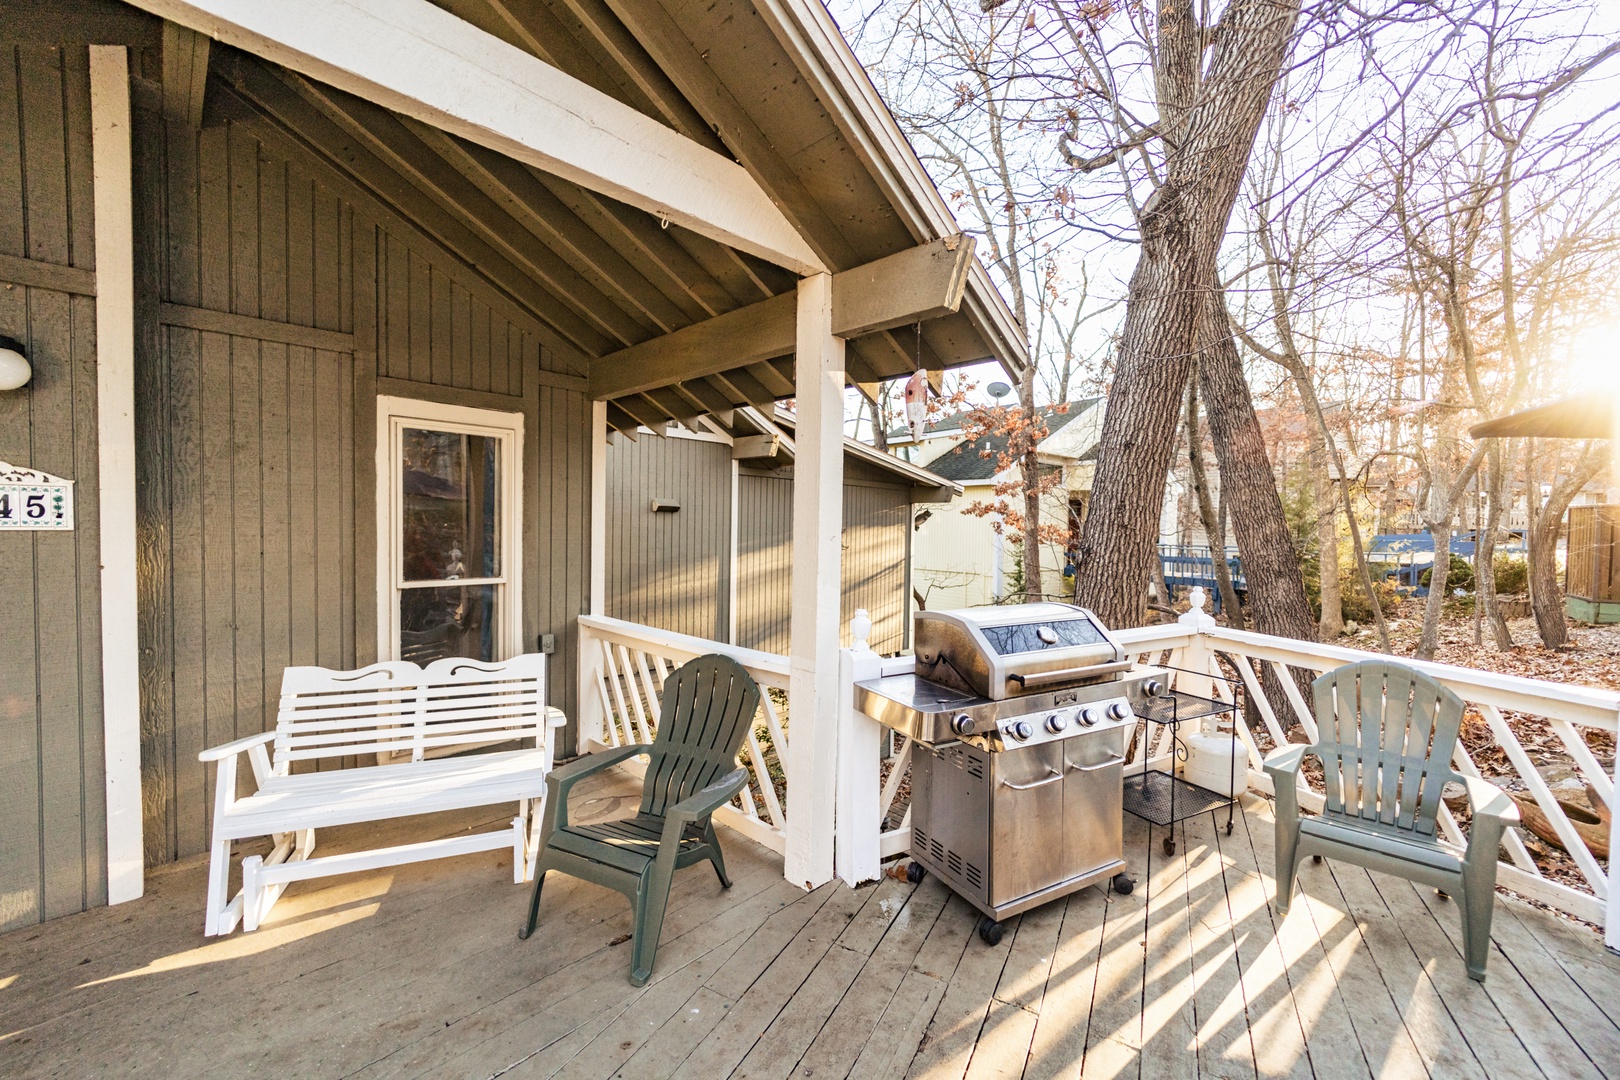 Relax in the fresh air on the front deck while you grill up a feast!